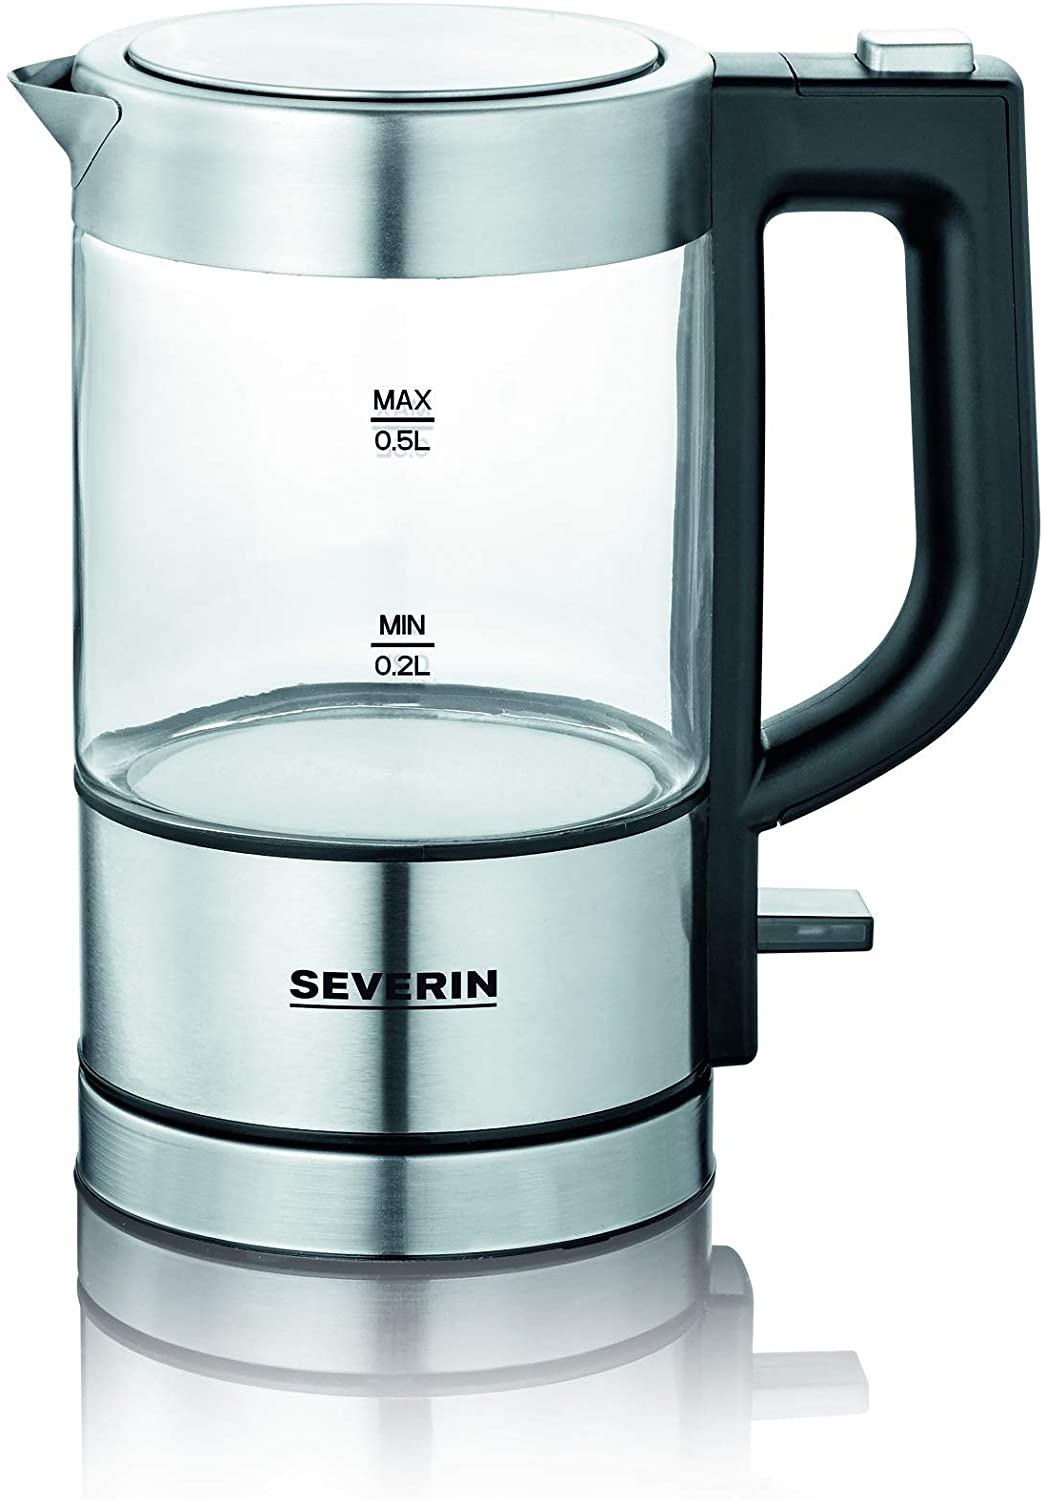 SEVERIN Mini glass kettle, powerful and compact kettle in high-quality design, electric kettle with limescale filter, stainless steel/black, WK 3472